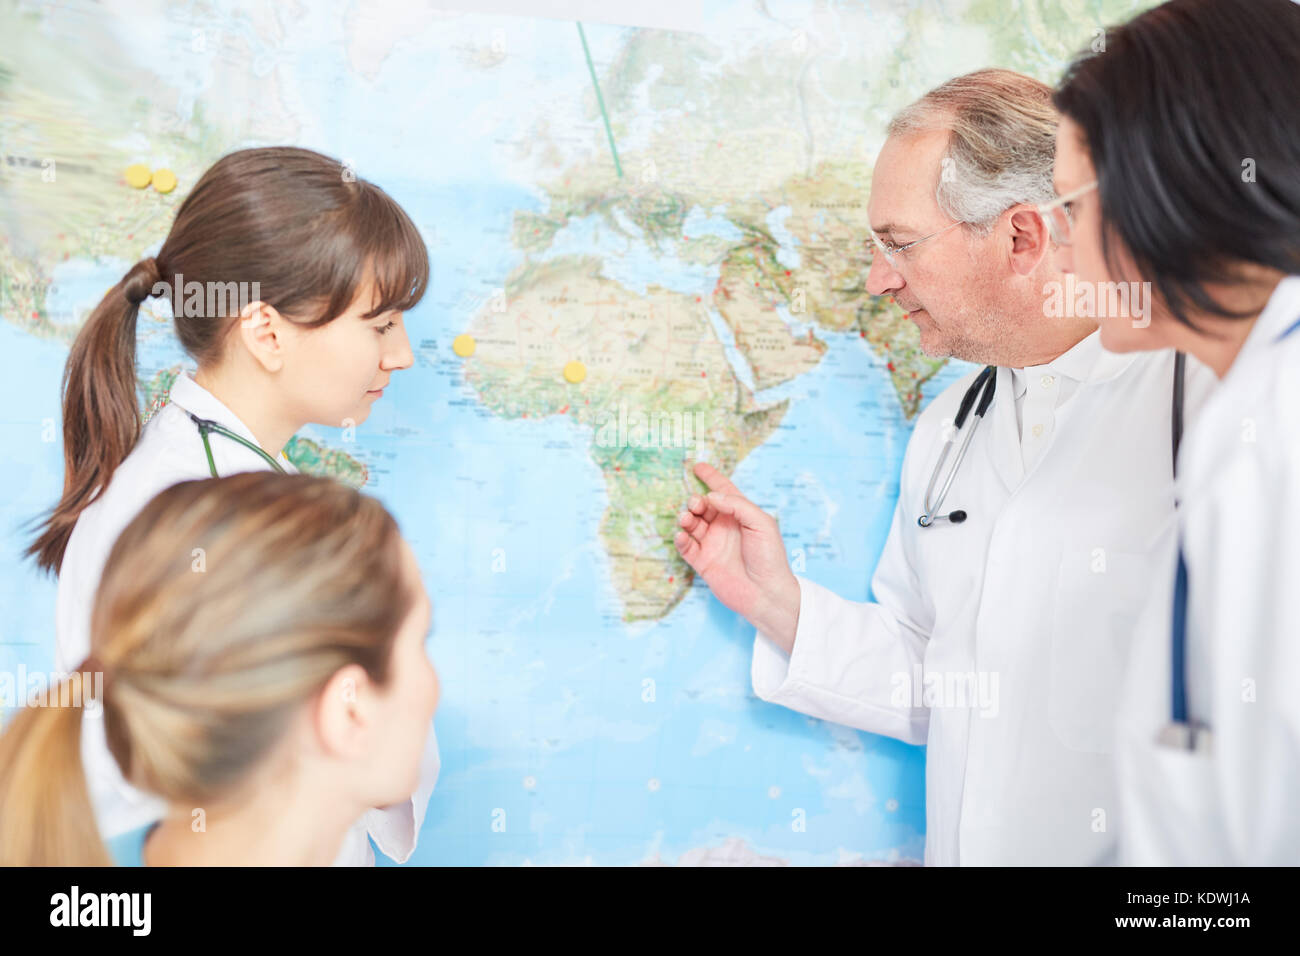 Team of doctors with world map plan relief action in Africa Stock Photo